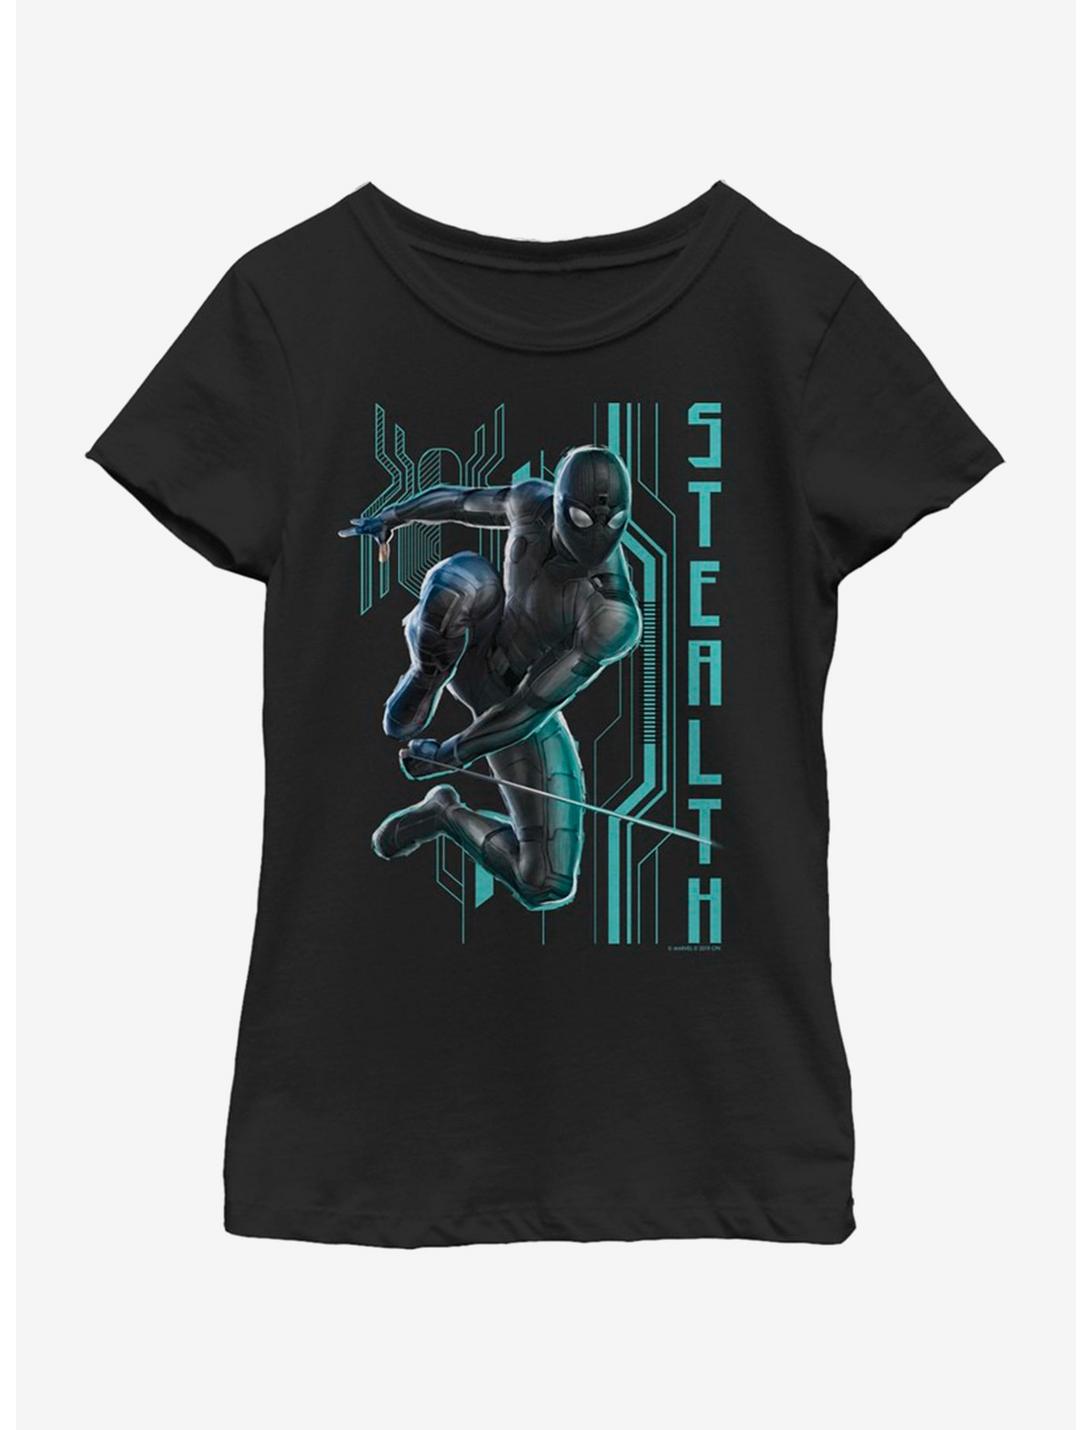 Marvel Spiderman: Far From Home Stealth Jumper Youth Girls T-Shirt, BLACK, hi-res